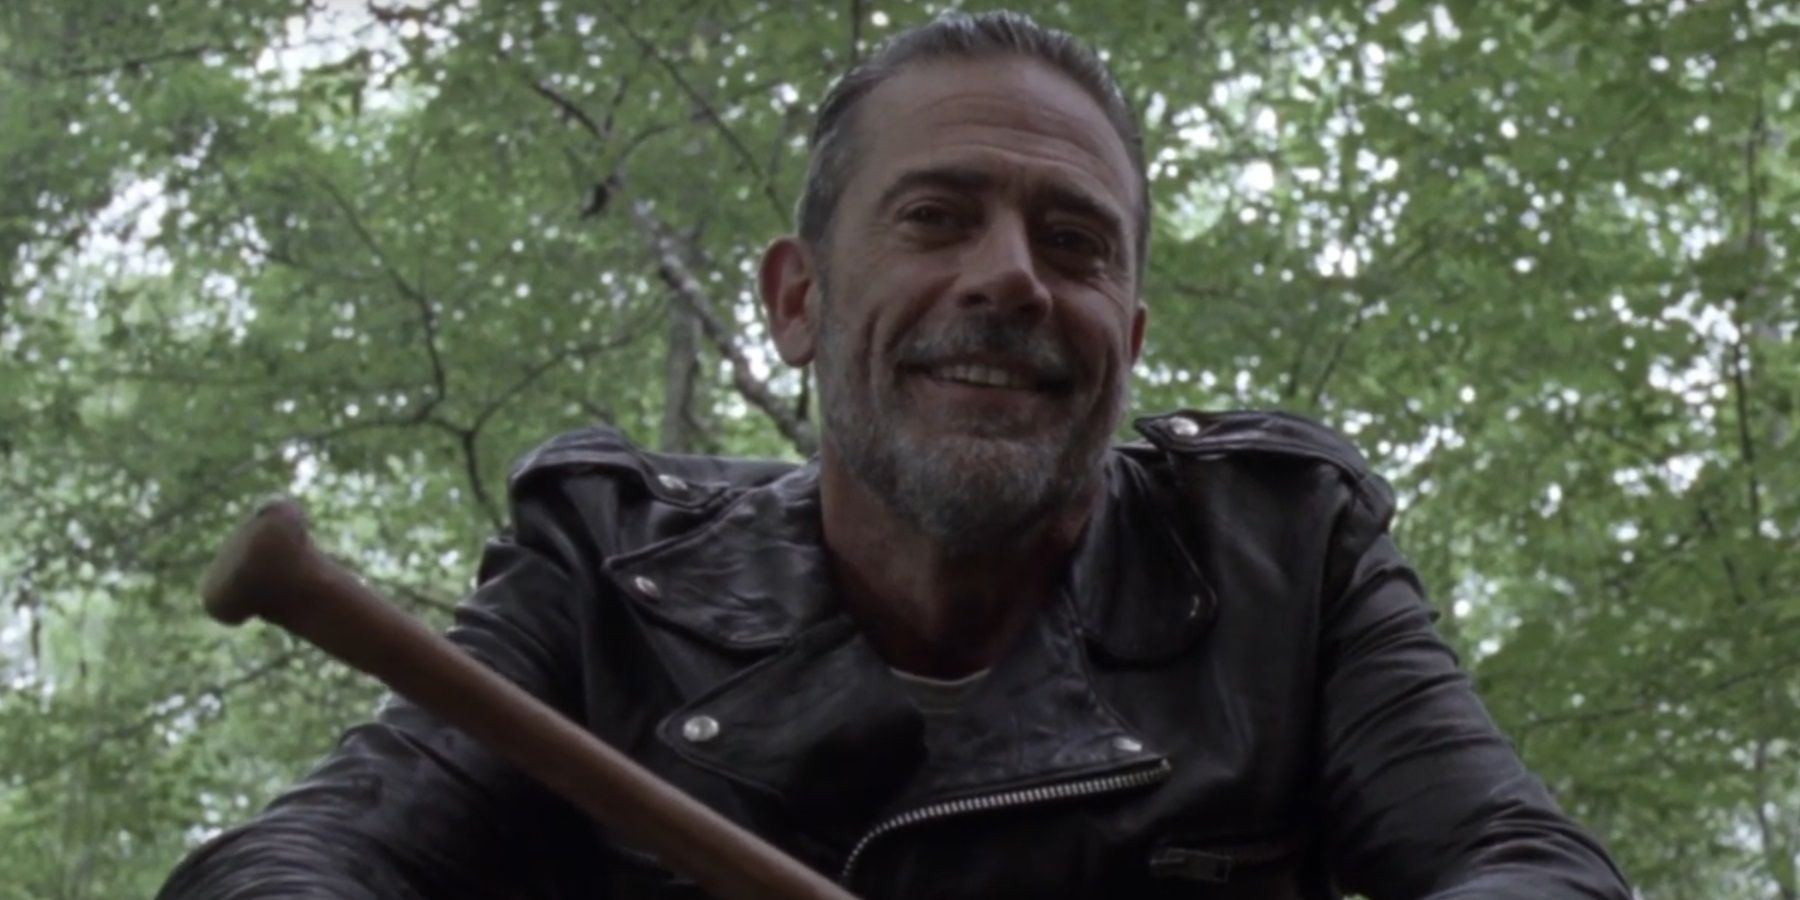 negan smiling as he holds a bat